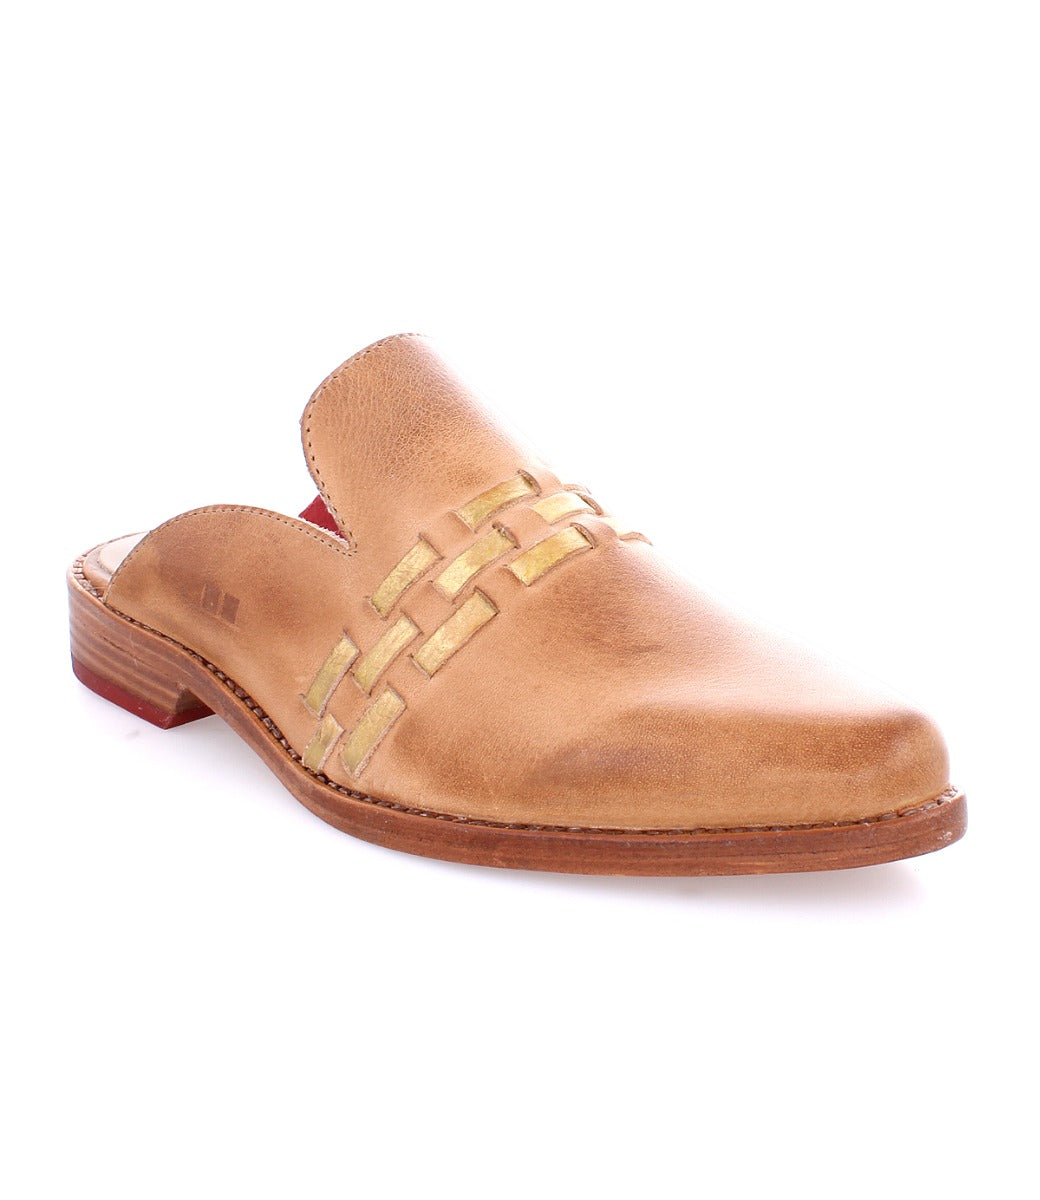 A Bed Stu women's tan leather slipper with braided detailing.